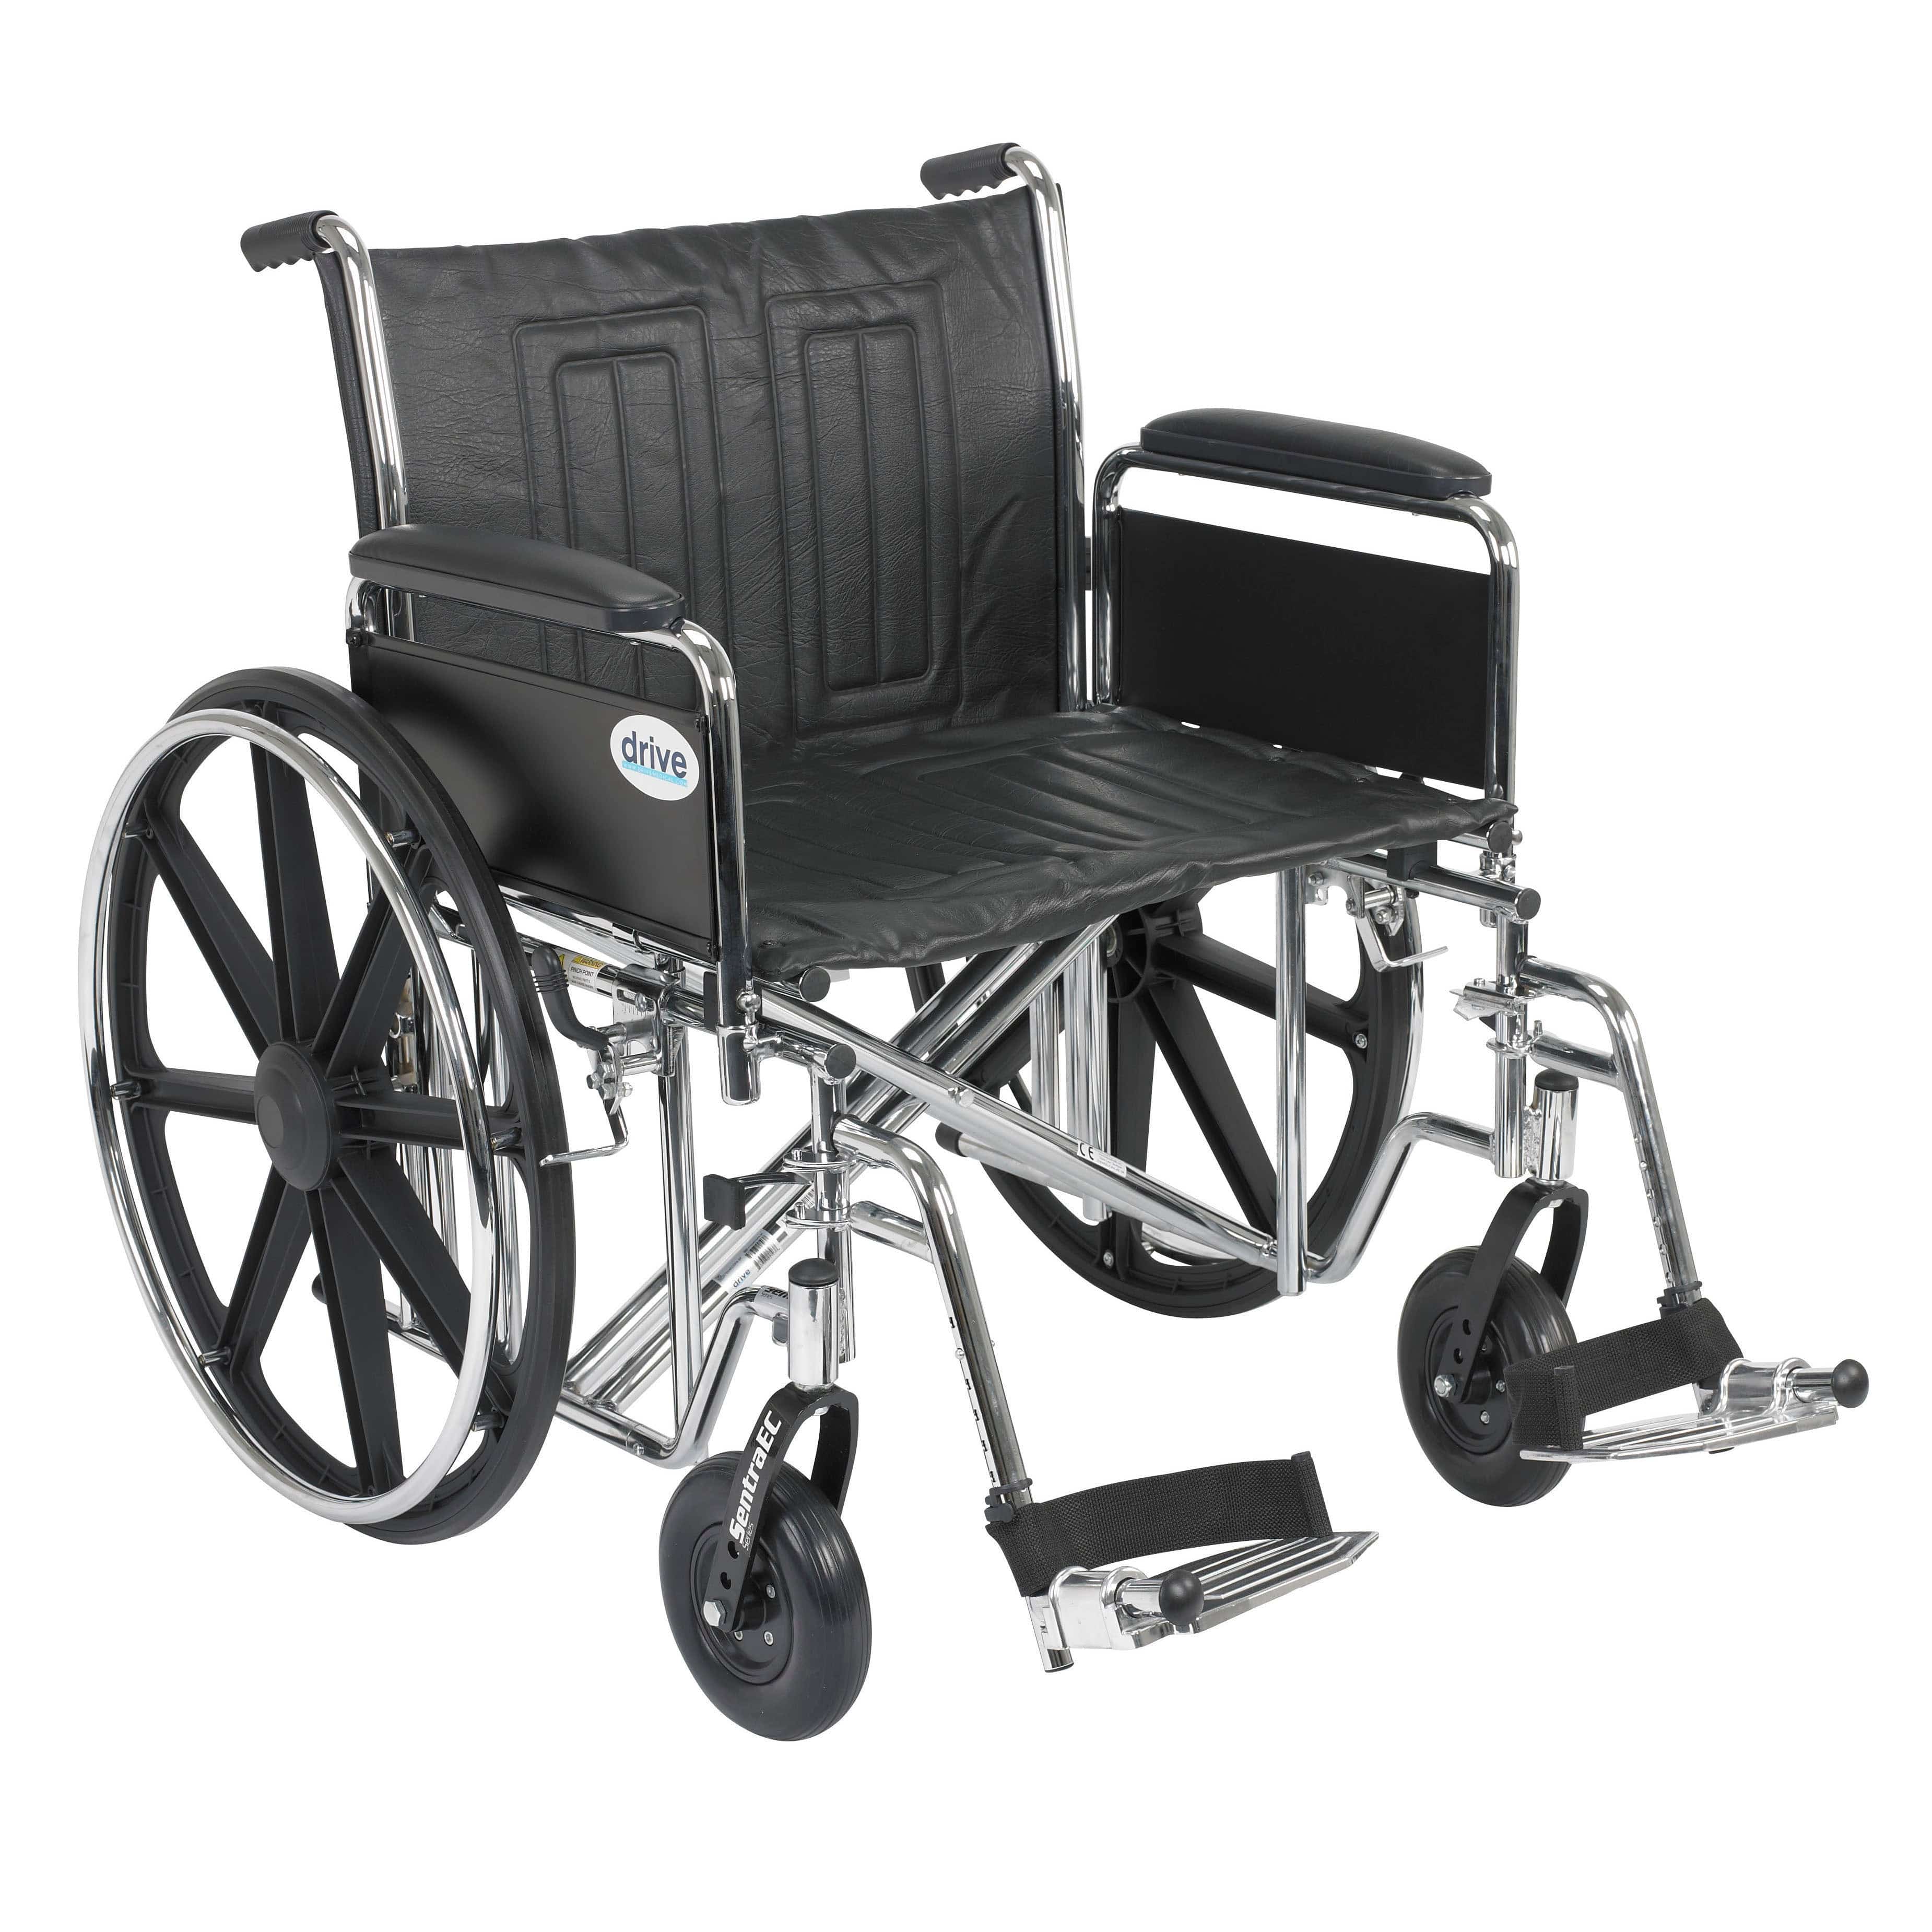 Drive Medical Wheelchairs Detachable Full Arms and Swing away Footrests / 24" Seat Drive Medical Sentra EC Heavy Duty Wheelchair